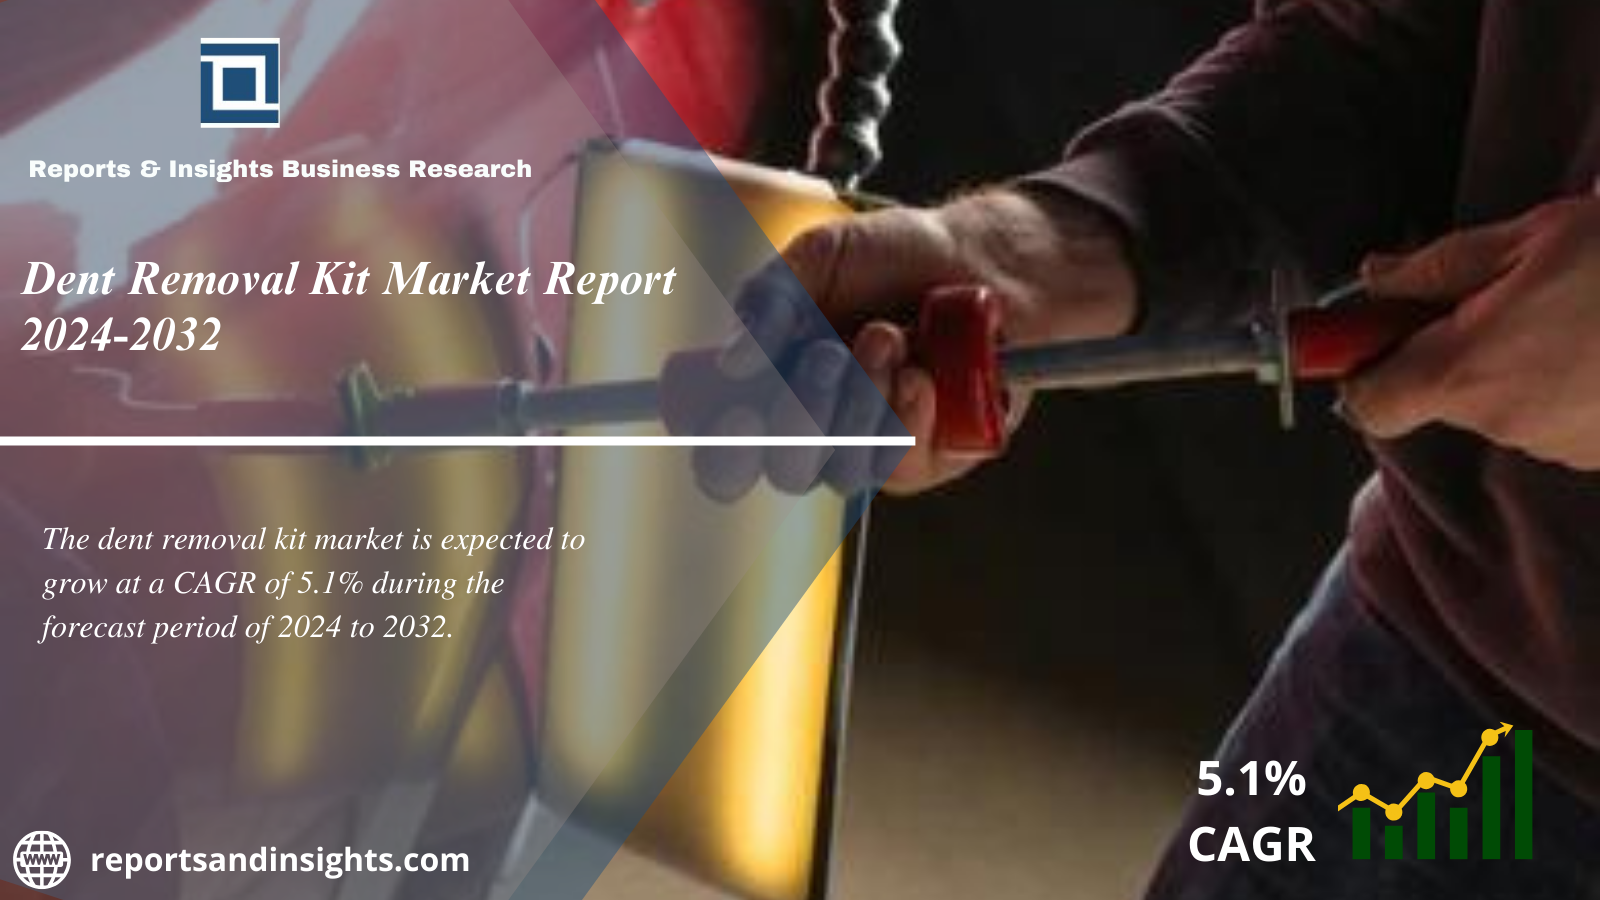 Dent Removal Kit Market Industry, Growth, Trends, Share, Size, Analysis and Forecast 2024 to 2032